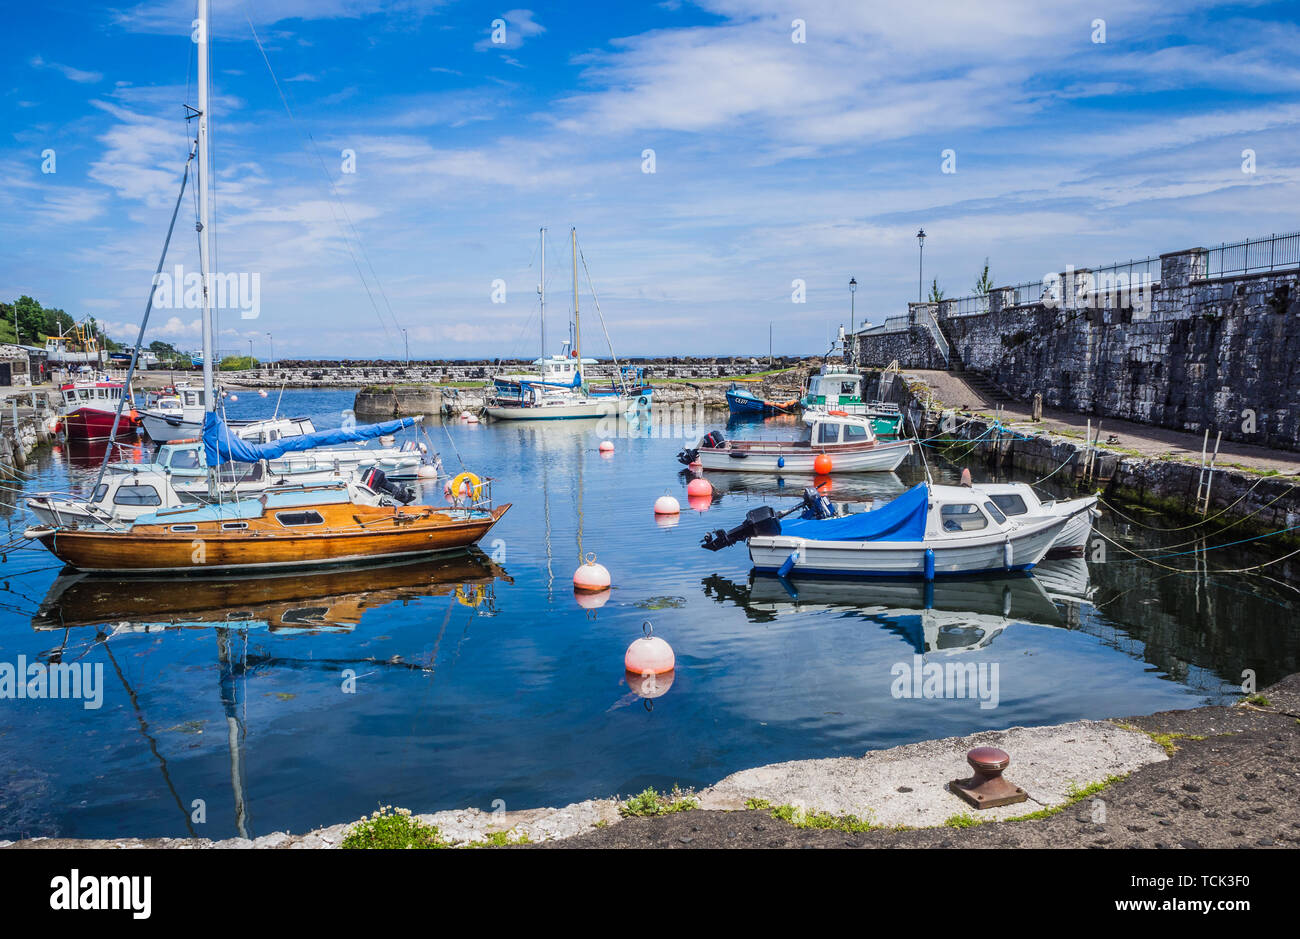 Carnlough, a small village on the causeway coastal road in Antrim, Northern Ireland Stock Photo